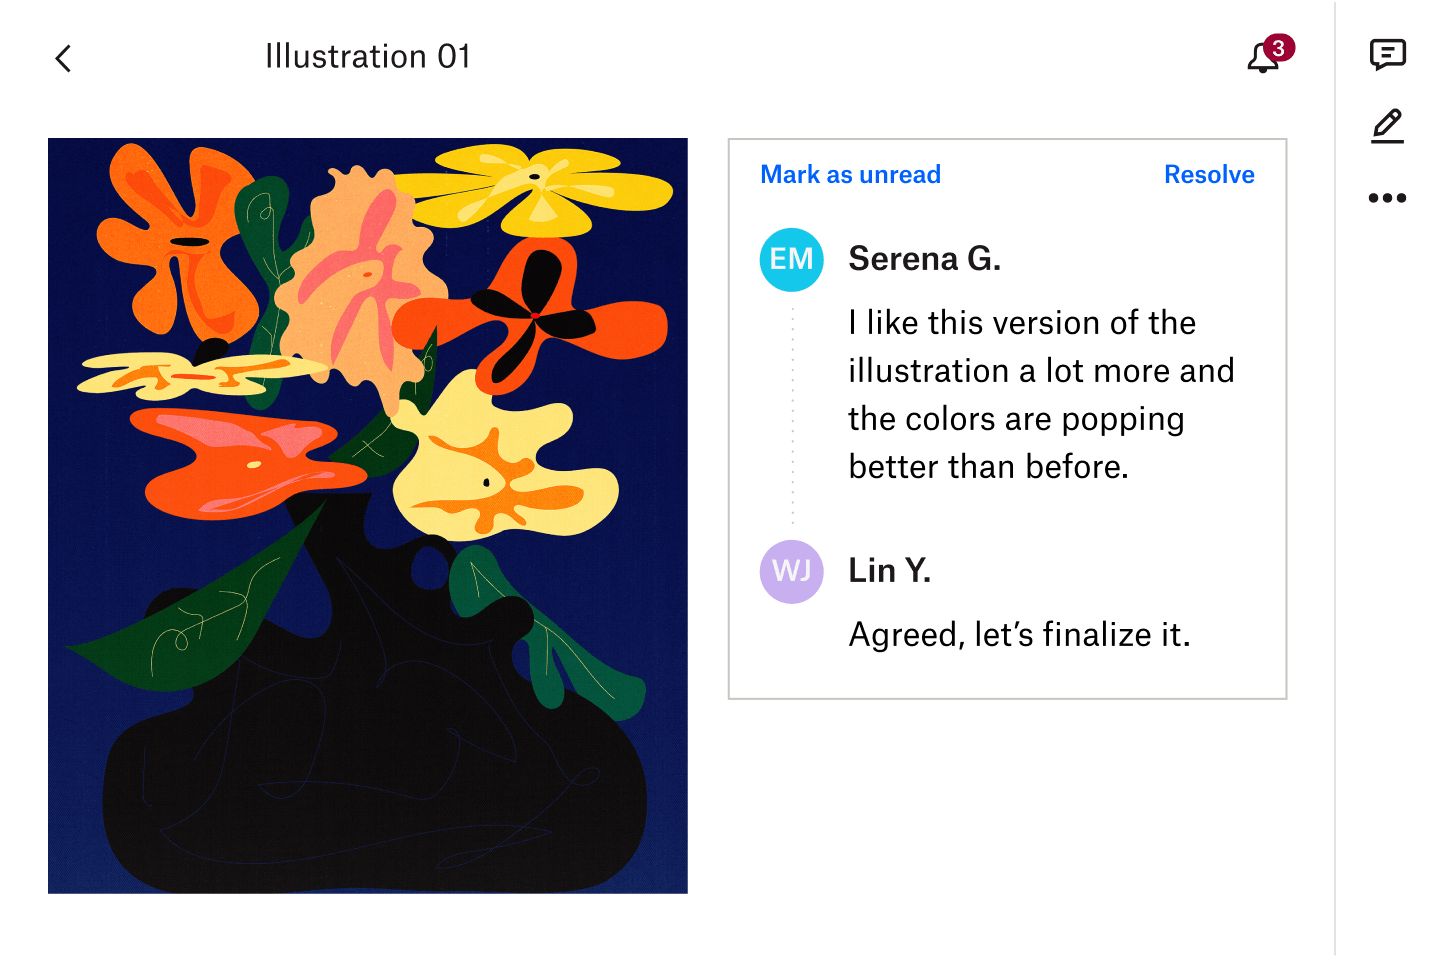 Image of comments from team members that have be added to a file for ease of collaboration